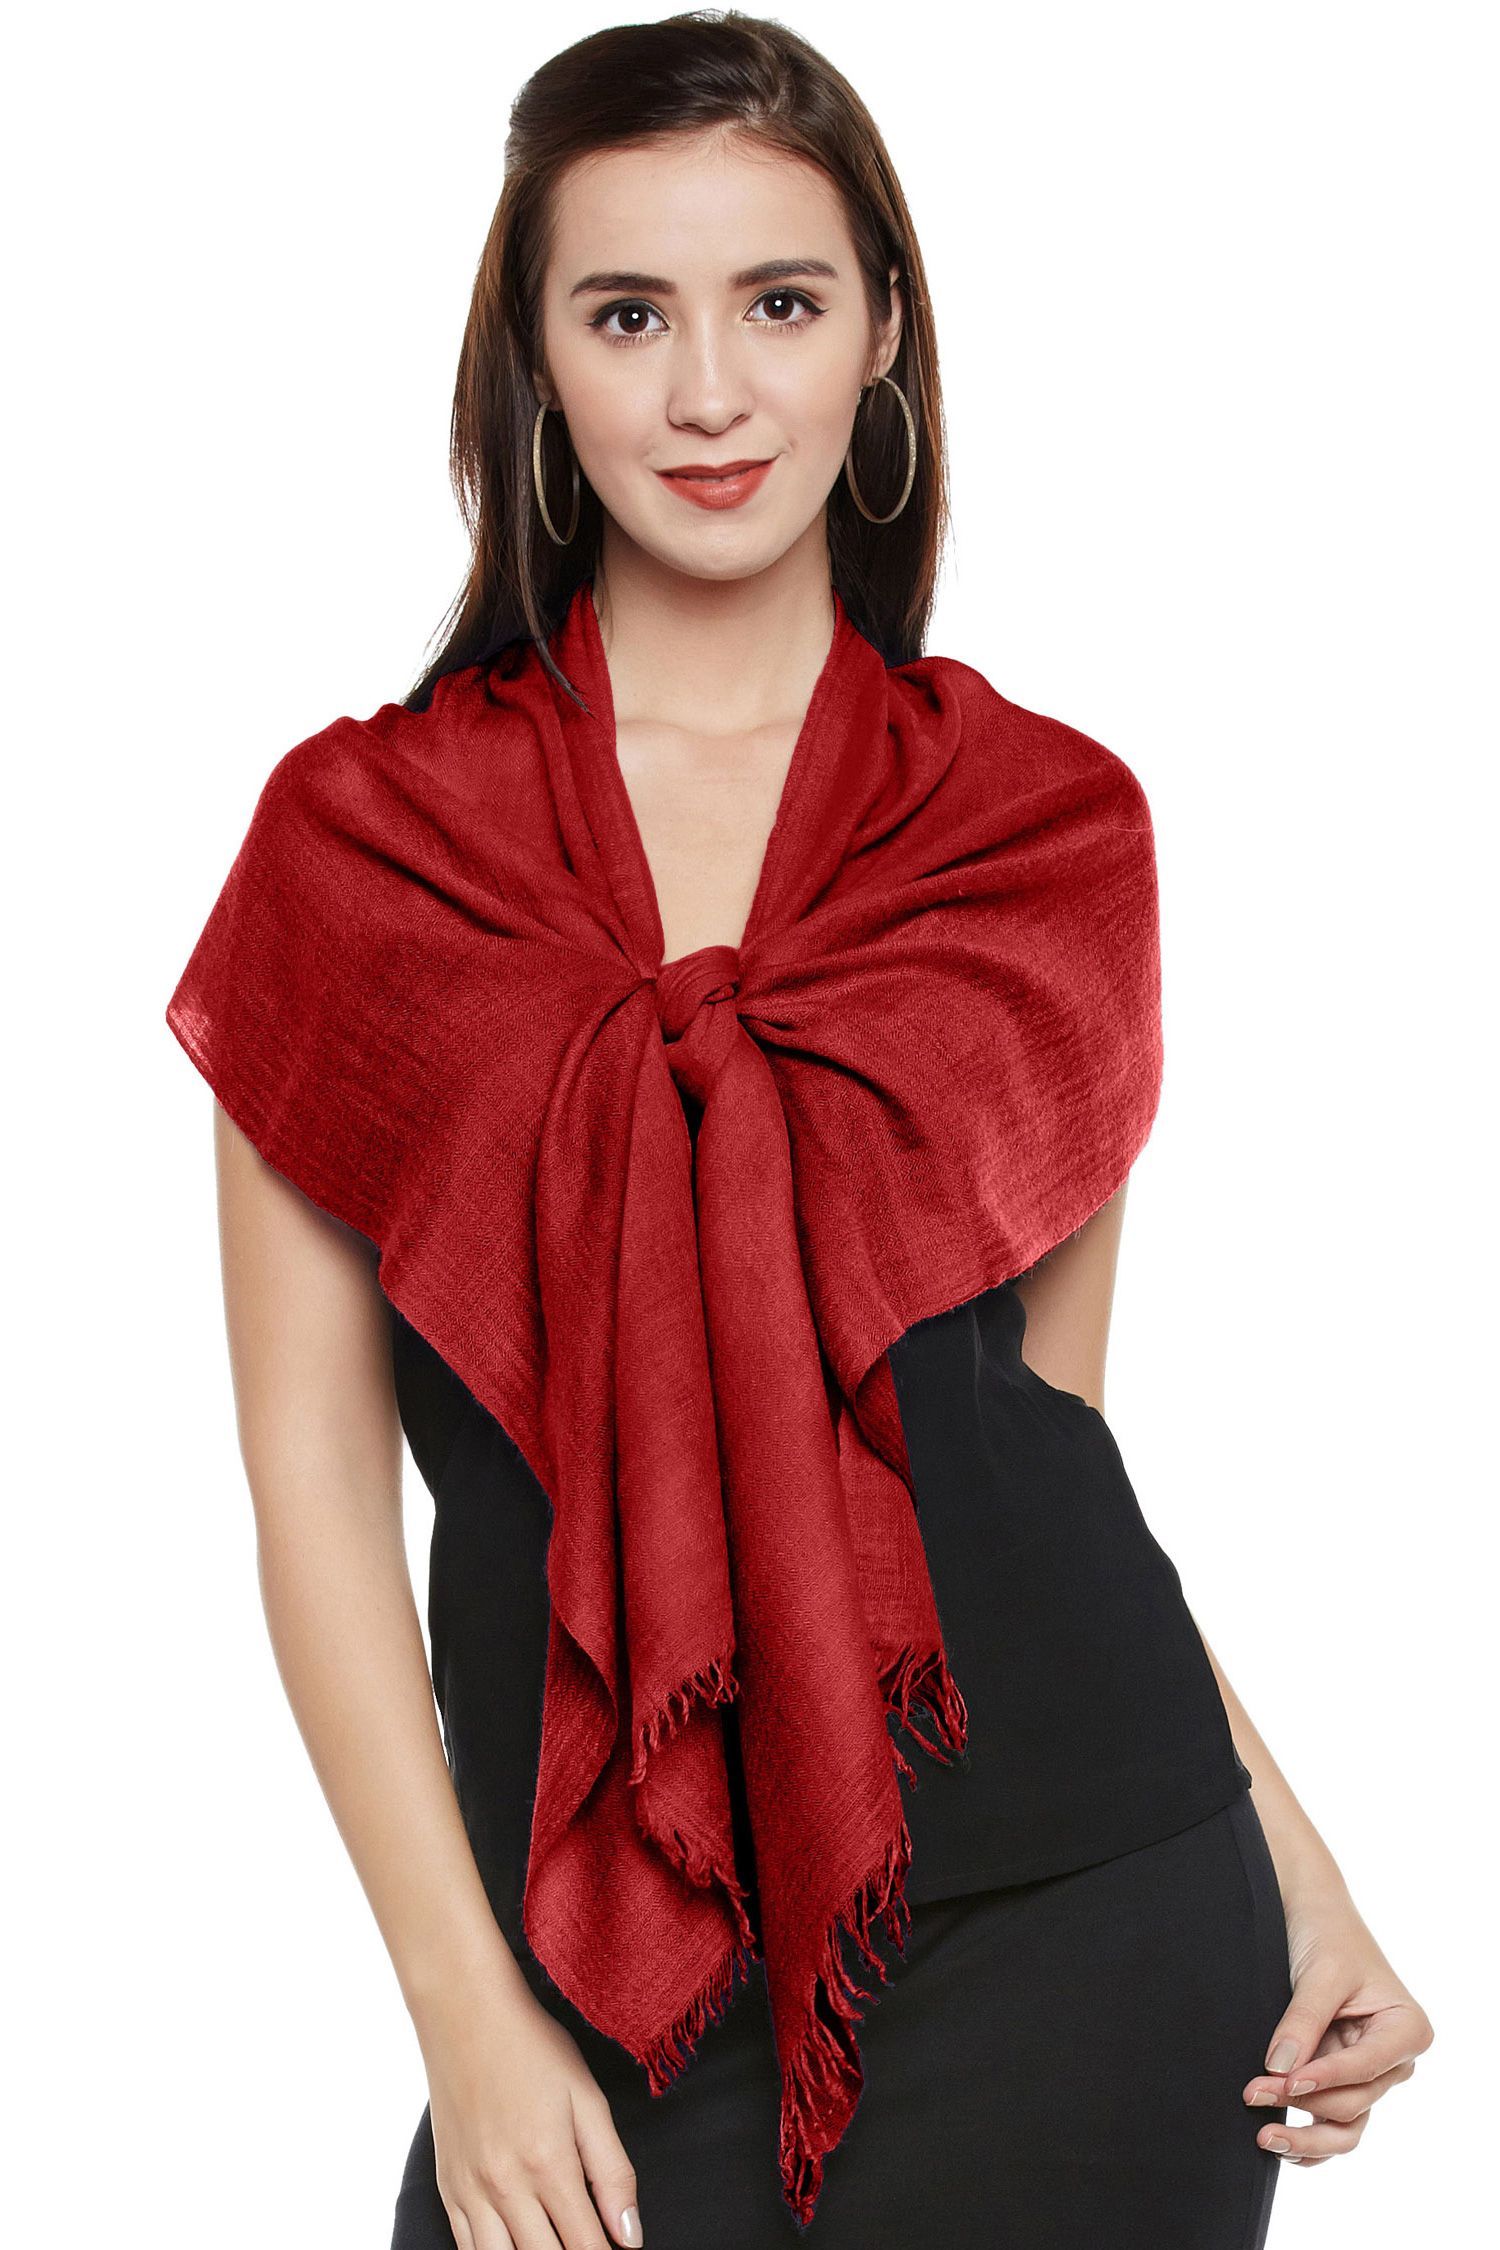 Red Color Strawberry Fruit With Green Leaf Scarfs For Women Lightweight Casual Scarf Cashmere Scarf Large 77x27/196x68cm Large Soft Pashmina Extra Warm 